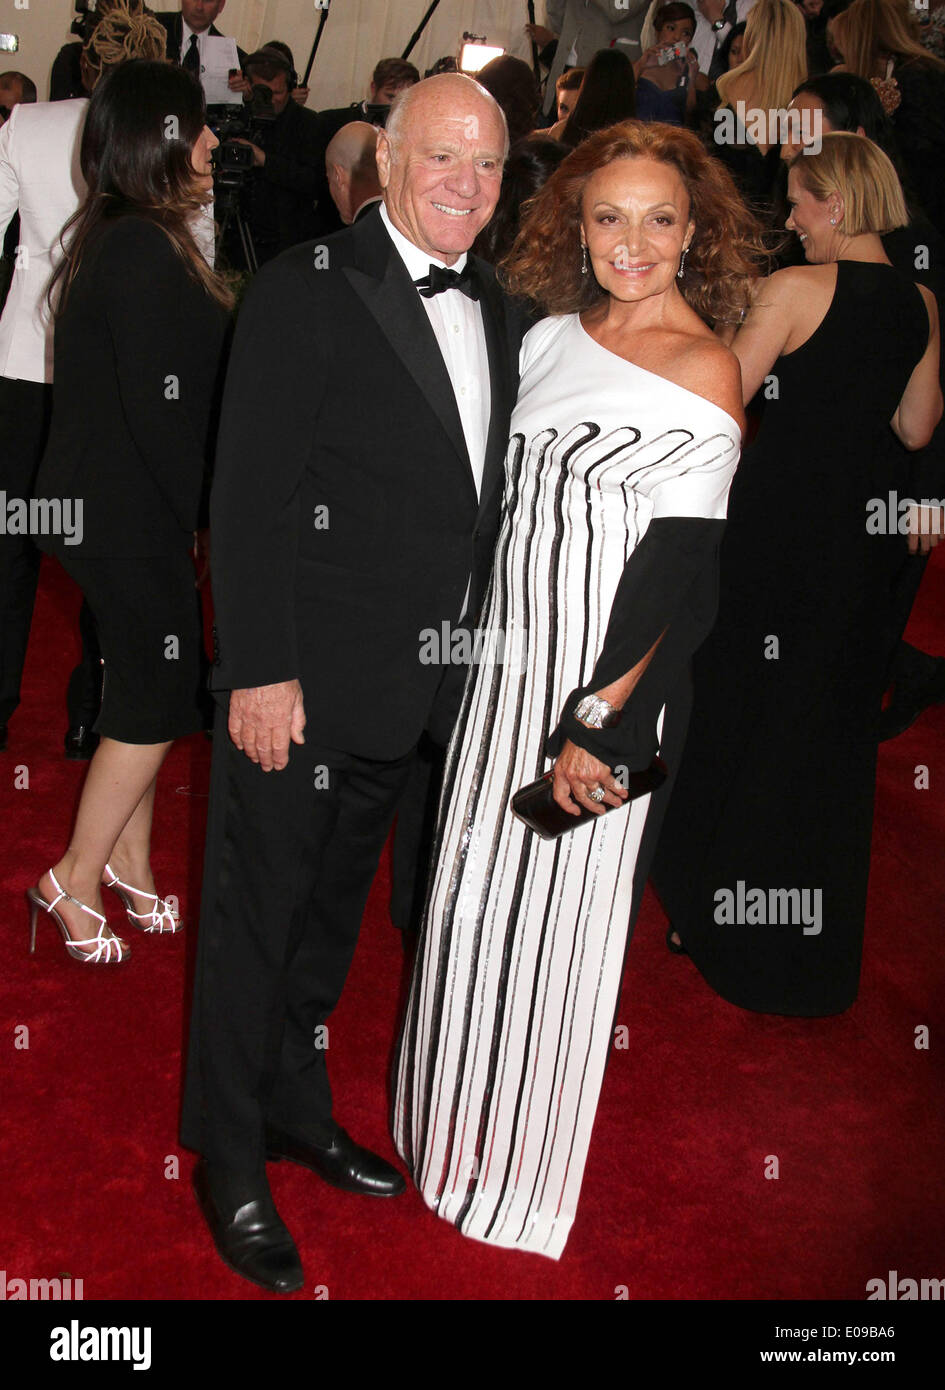 New York, New York, USA. 5th May, 2014. BARRY DILLER and DIANE VON FURSTENBERG attend the 2014 Costume Institute Benefit Gala opening of 'Charles James: Beyond Fashion and the new Anna Wintour Costume Center' held at the Metropolitan Museum of Art. © Nancy Kaszerman/ZUMAPRESS.com/Alamy Live News Stock Photo